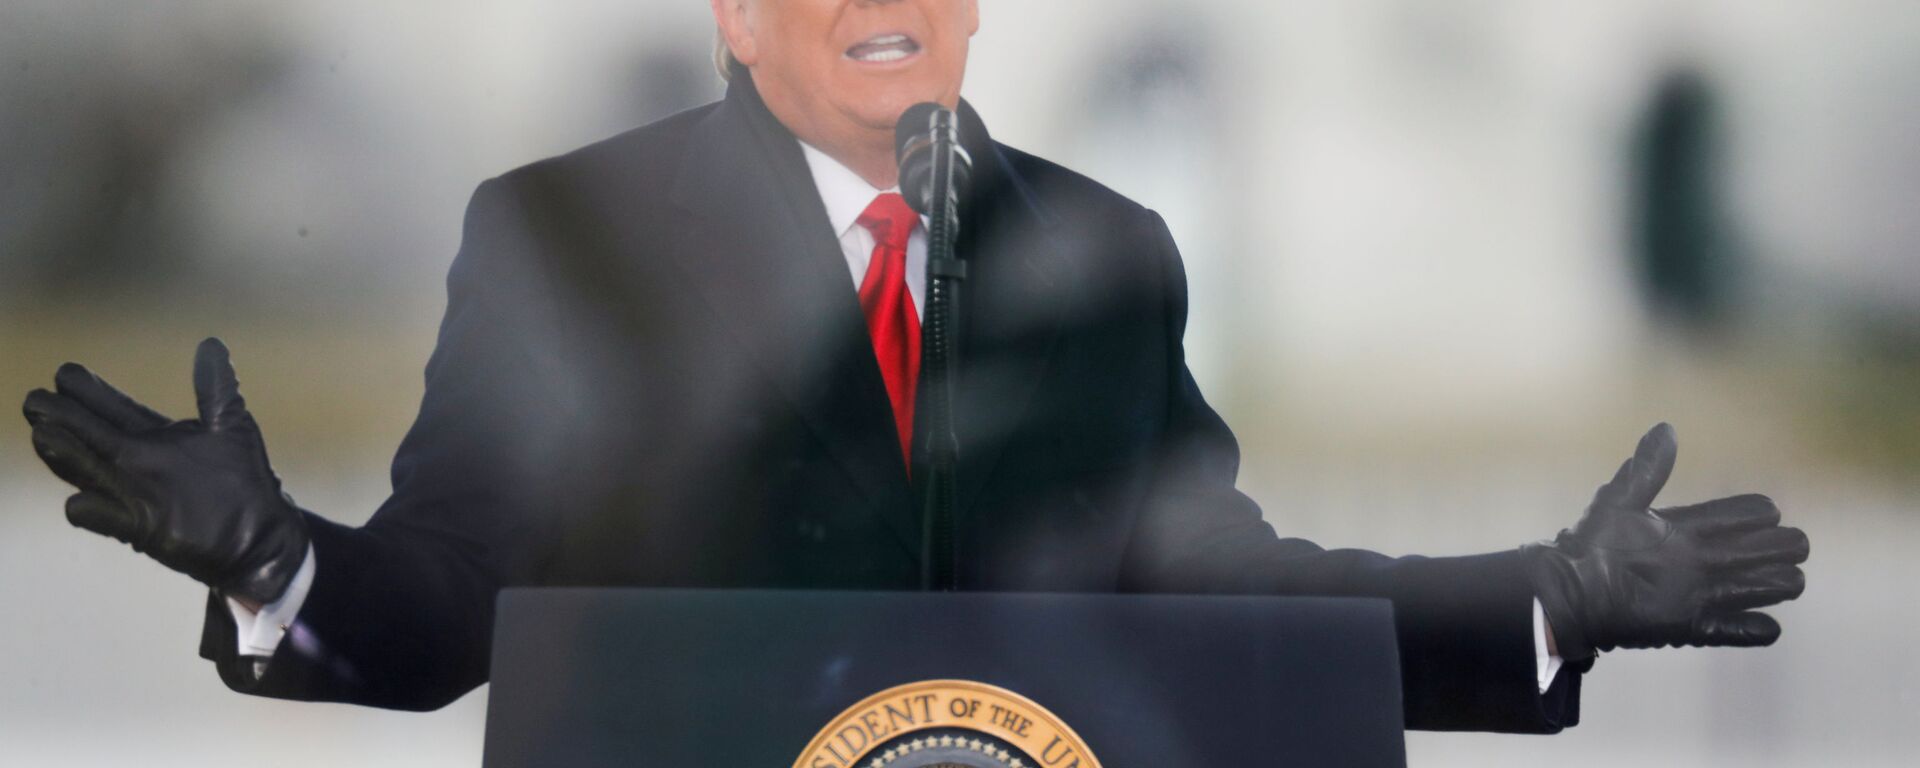 U.S. President Donald Trump speaks during a rally to contest the certification of the 2020 U.S. presidential election results by the U.S. Congress, in Washington, U.S, January 6, 2021. REUTERS/Jim Bourg/File Photo - Sputnik International, 1920, 28.02.2021